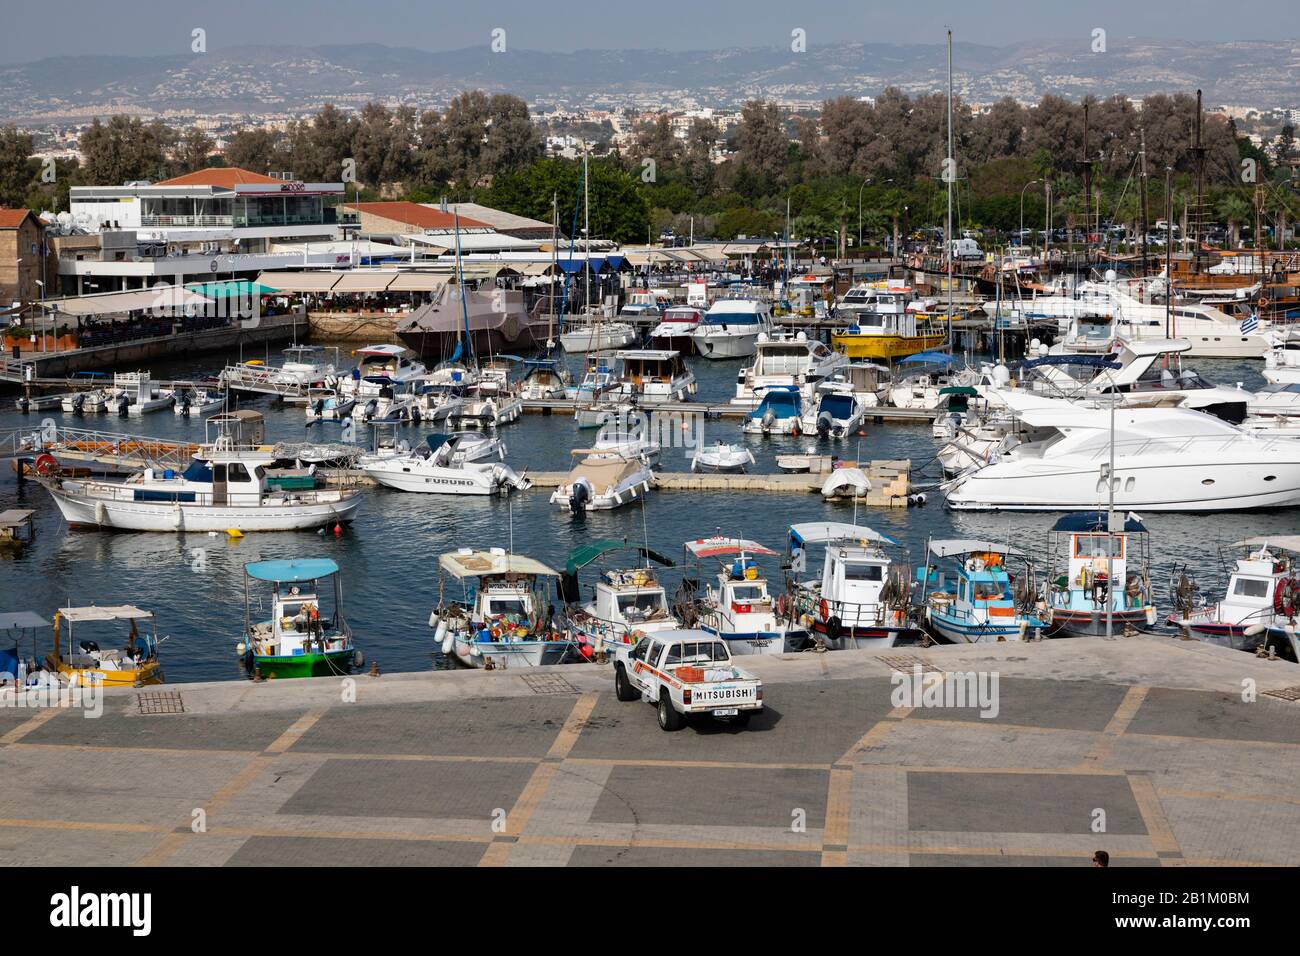 Traditional Cypriot fishing boats alongside  modern luxury yachts moored in Paphos harbour. Cyprus 2018. Stock Photo